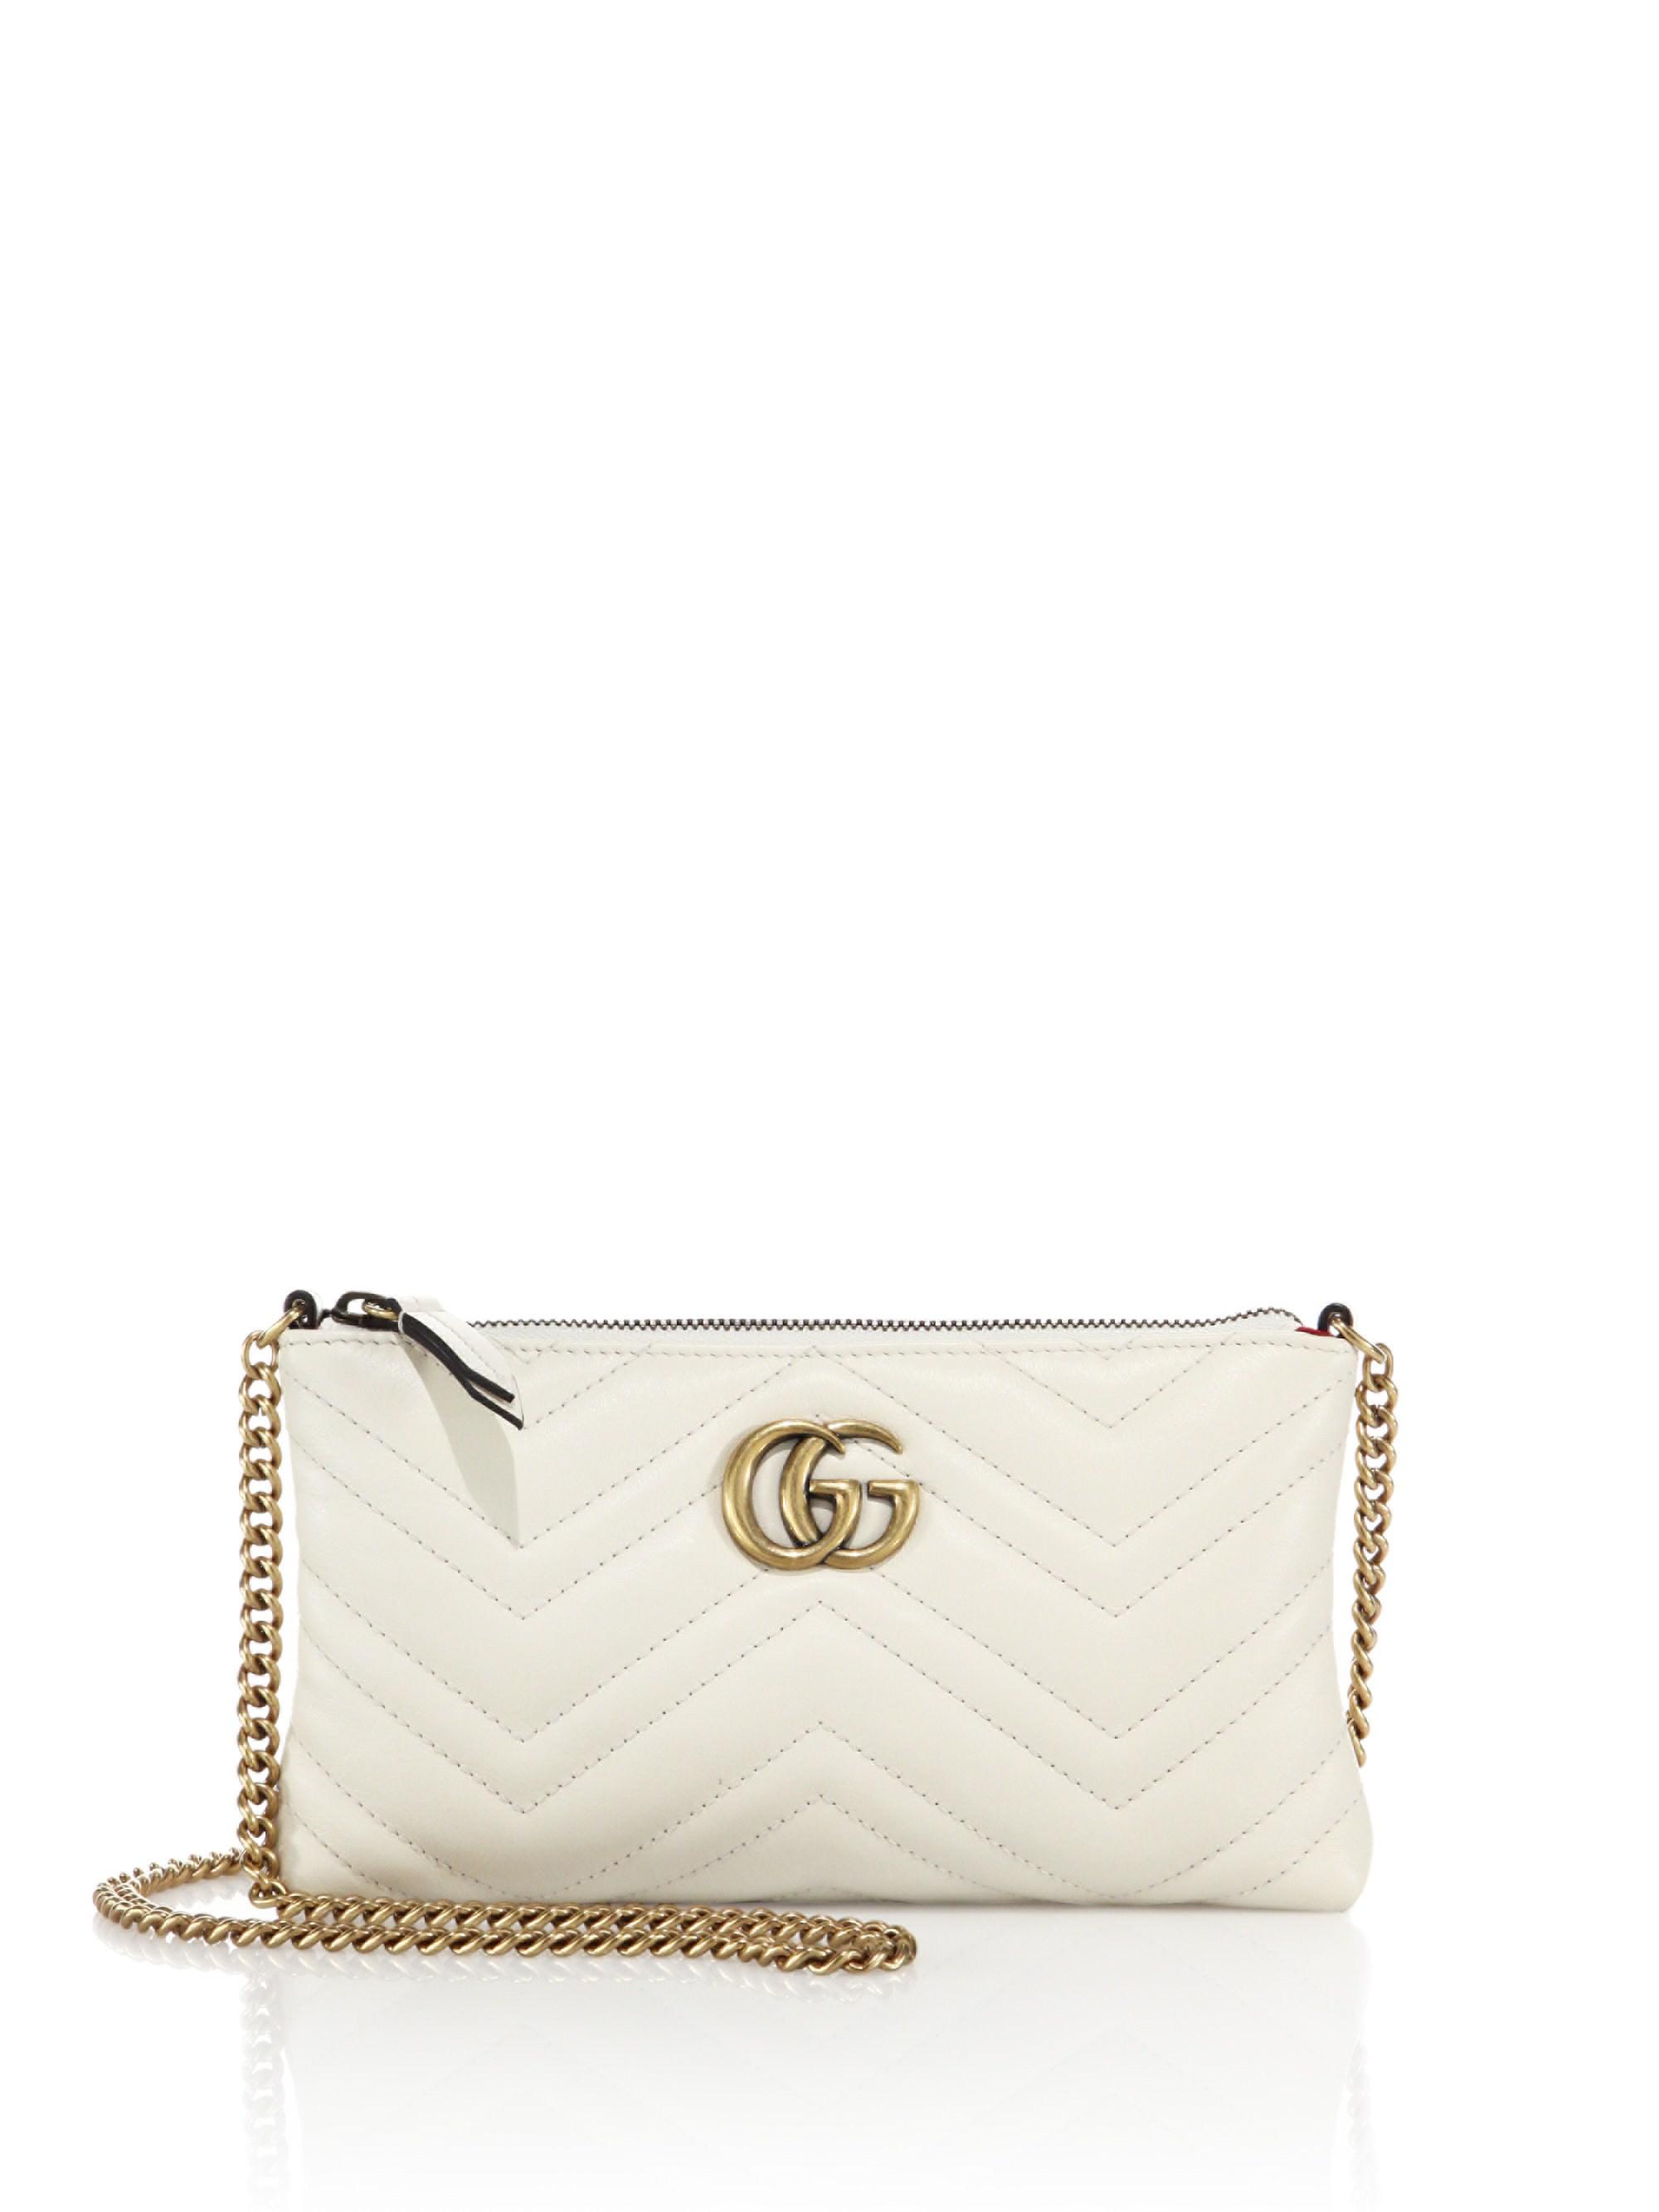 Gucci Quilted Leather Chain Wristlet in White - Lyst